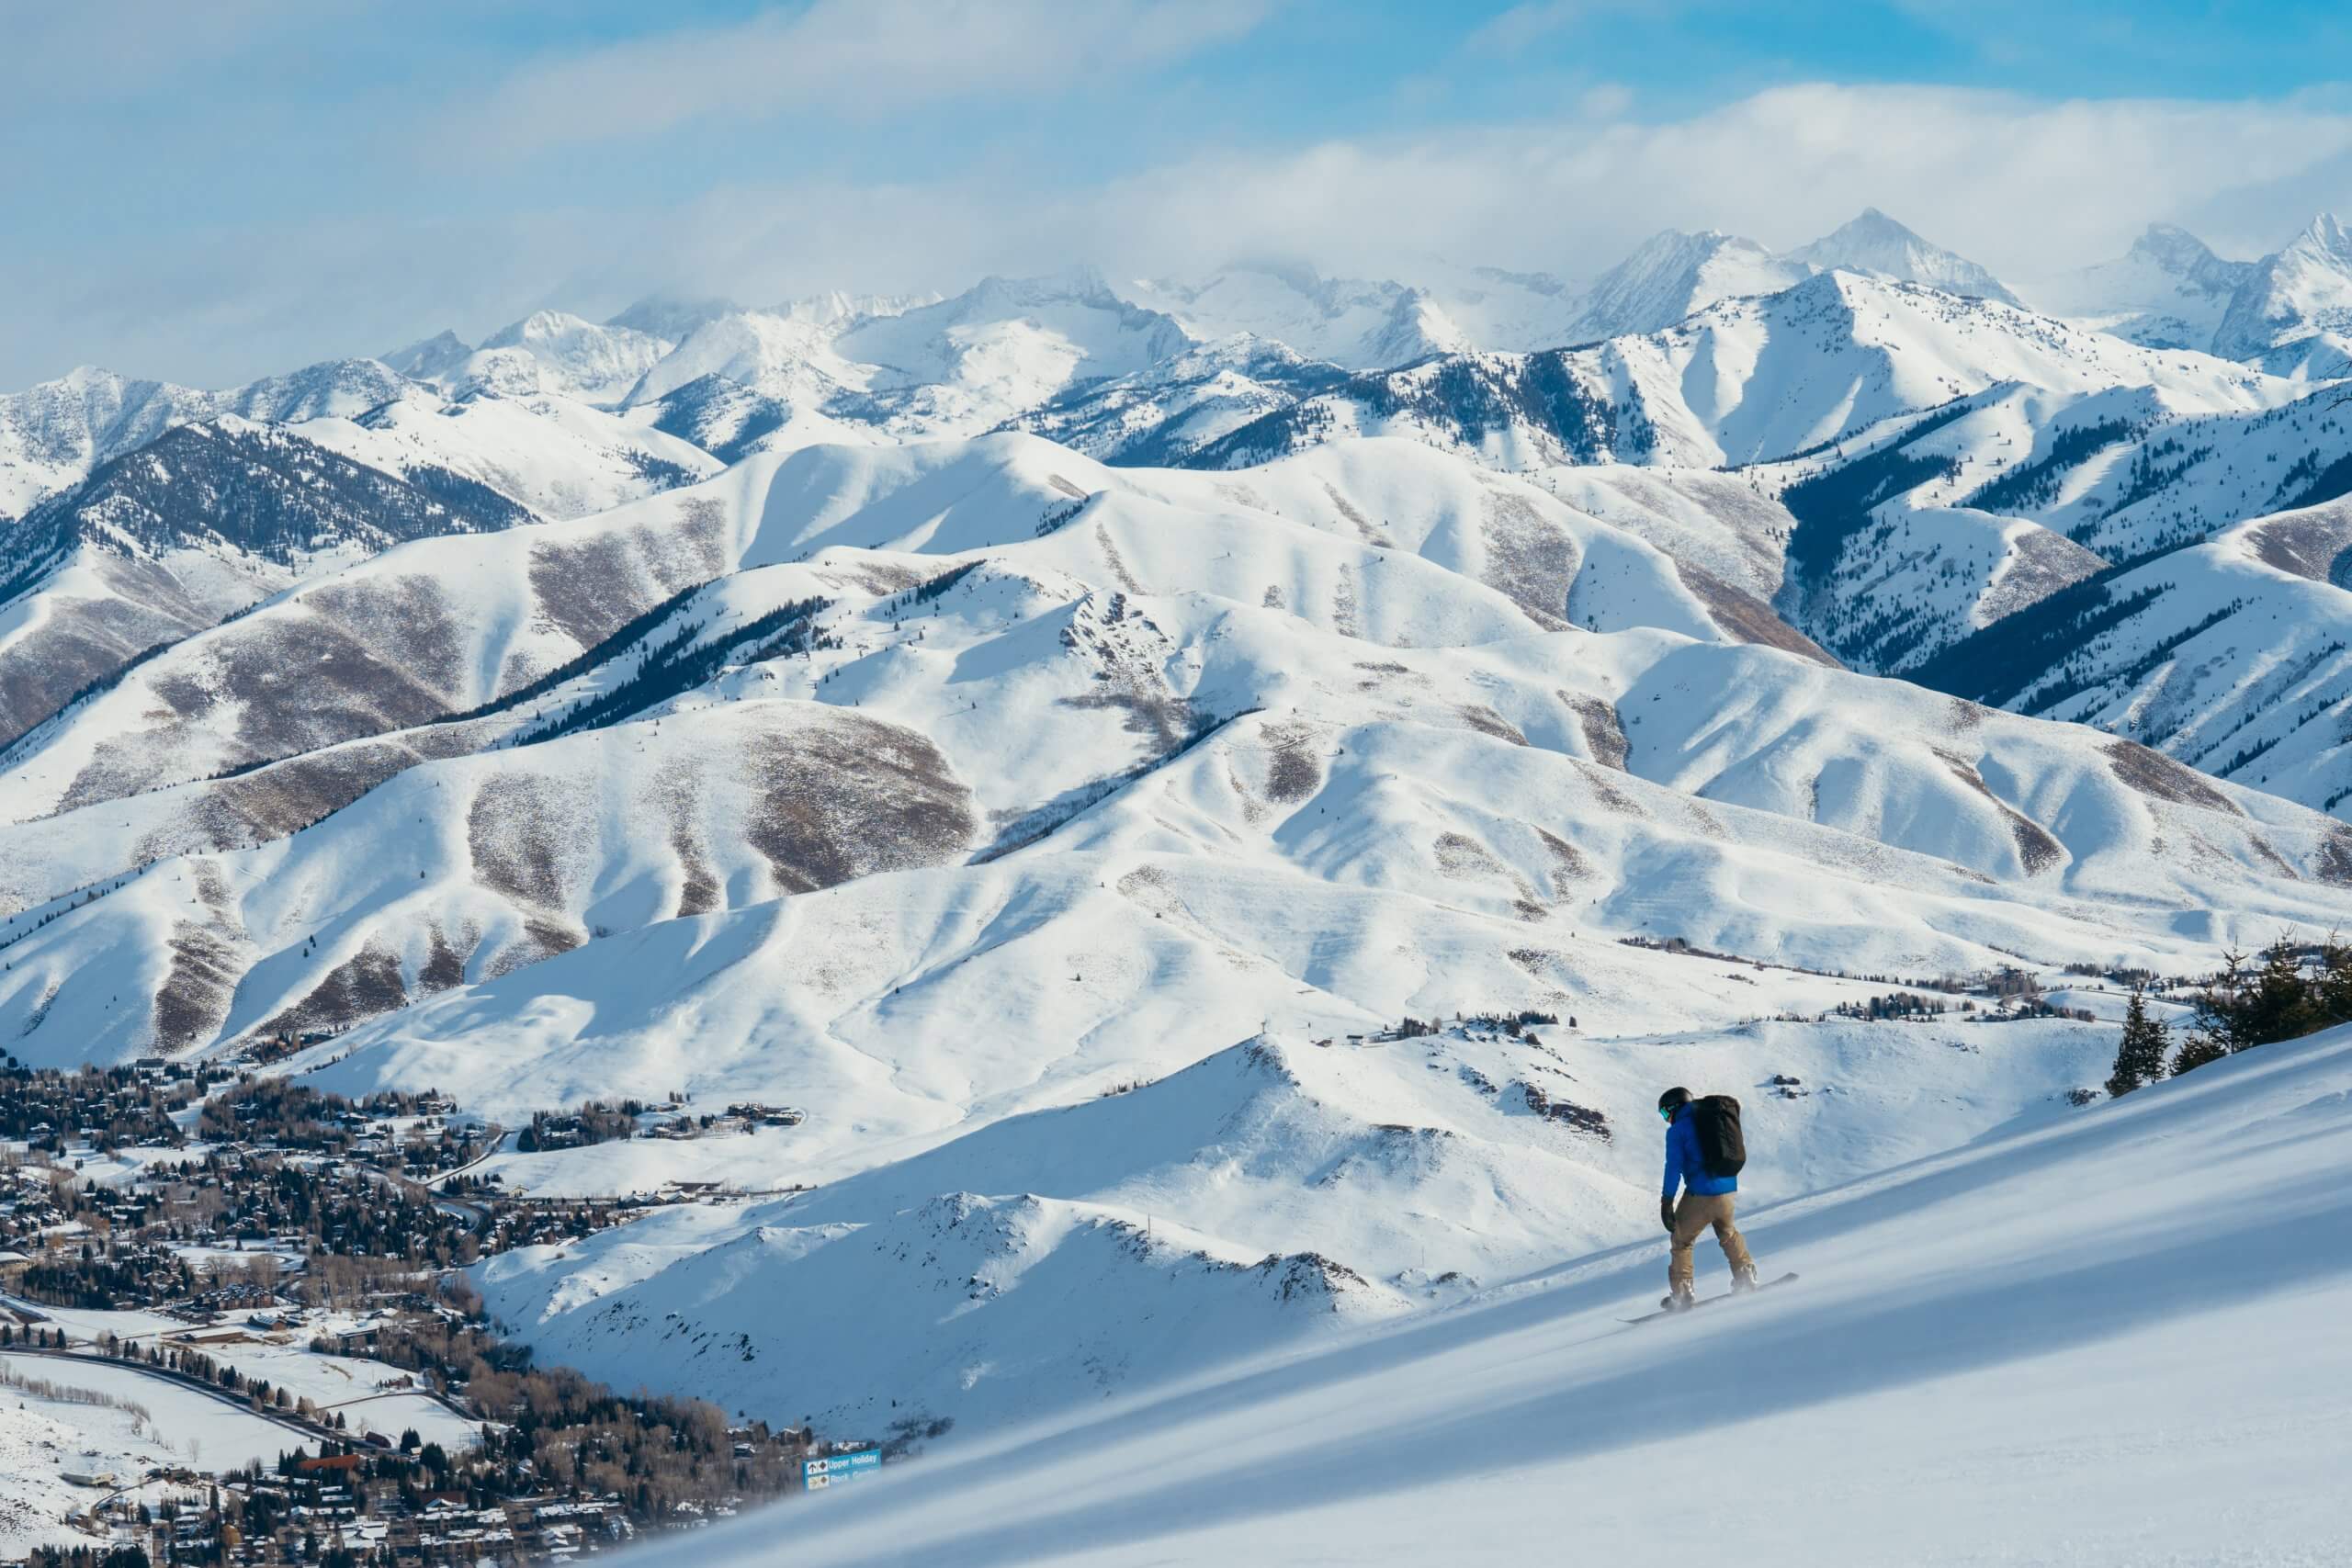 A person snowboarding above Sun Valley with snow-covered mountains in the background.